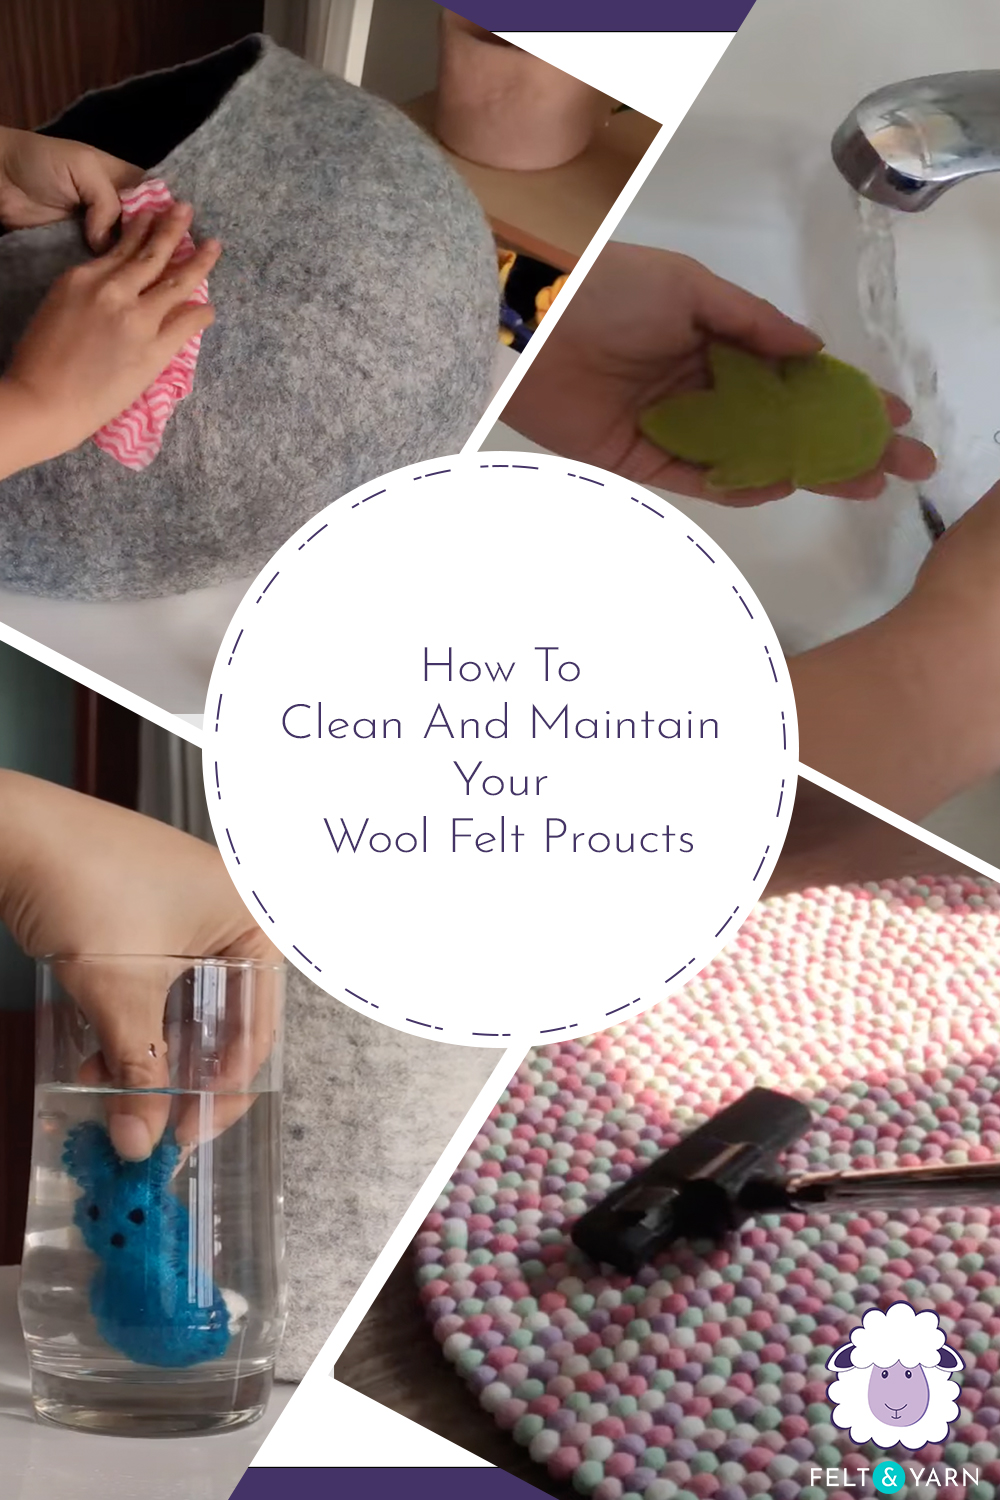 how%20to%20clean%20and%20maintain%20your%20wool%20felt%20product.jpeg